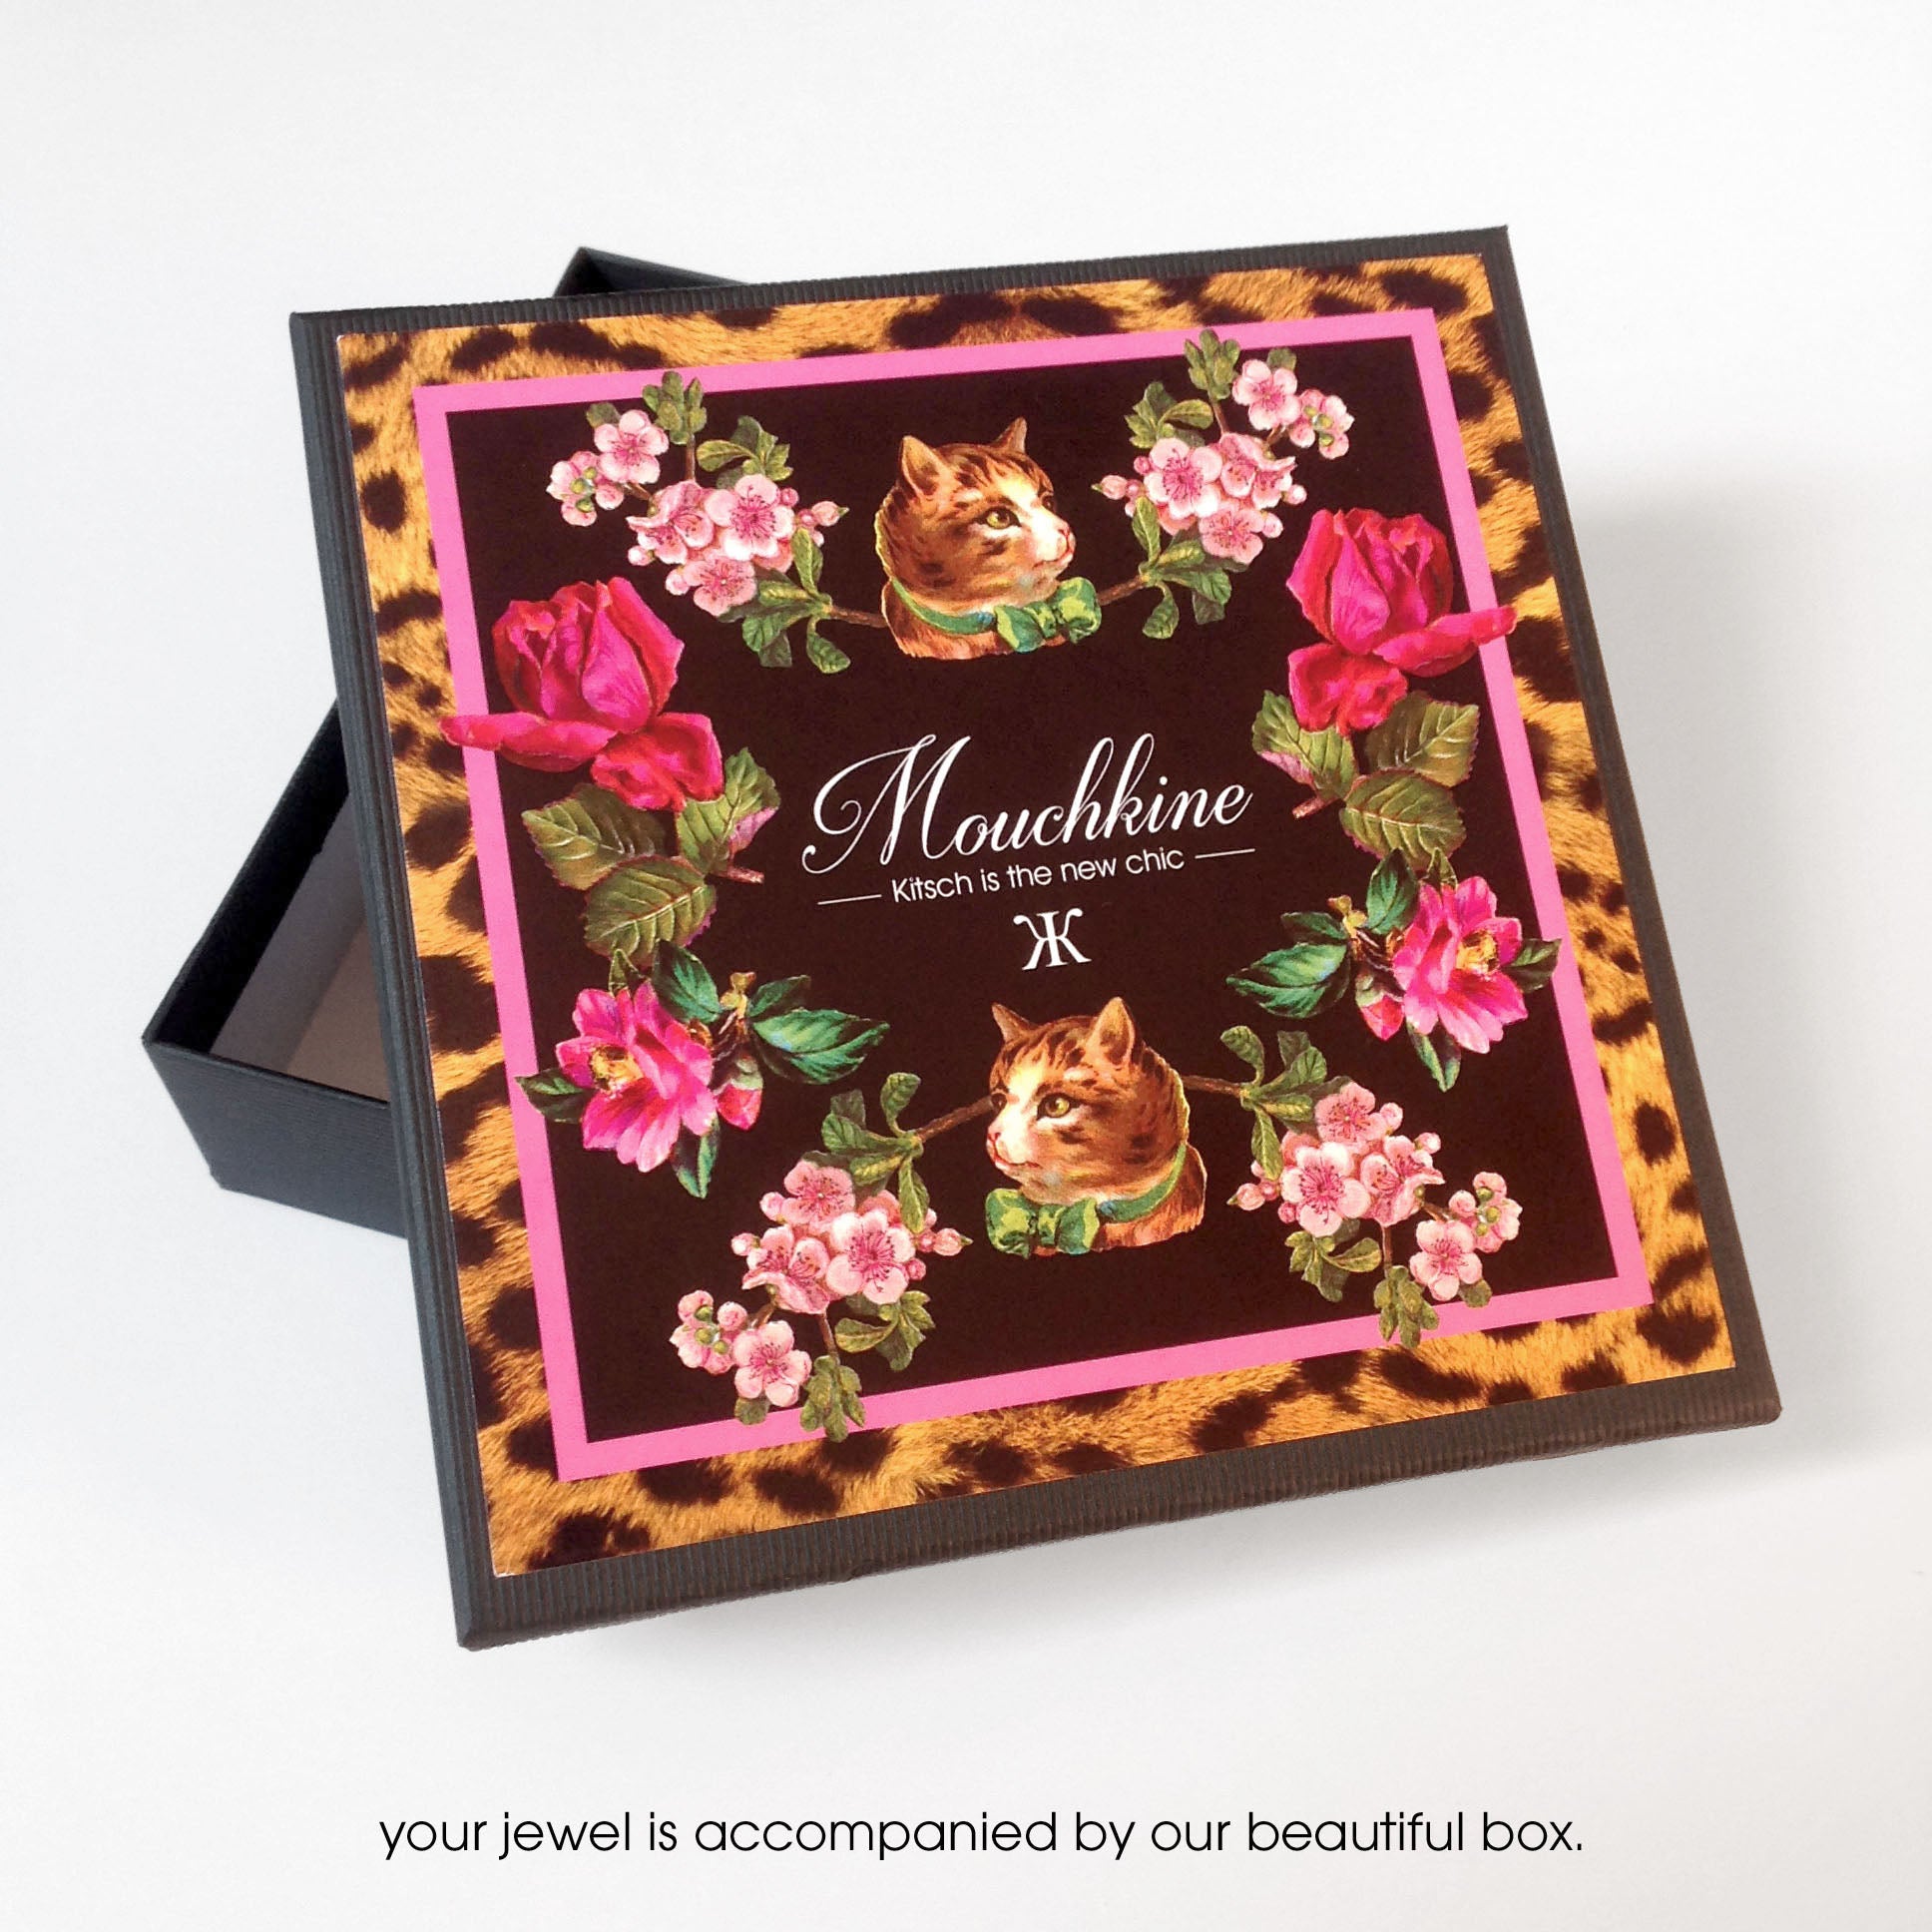 mouchkine jewelry luxury packaging made in france